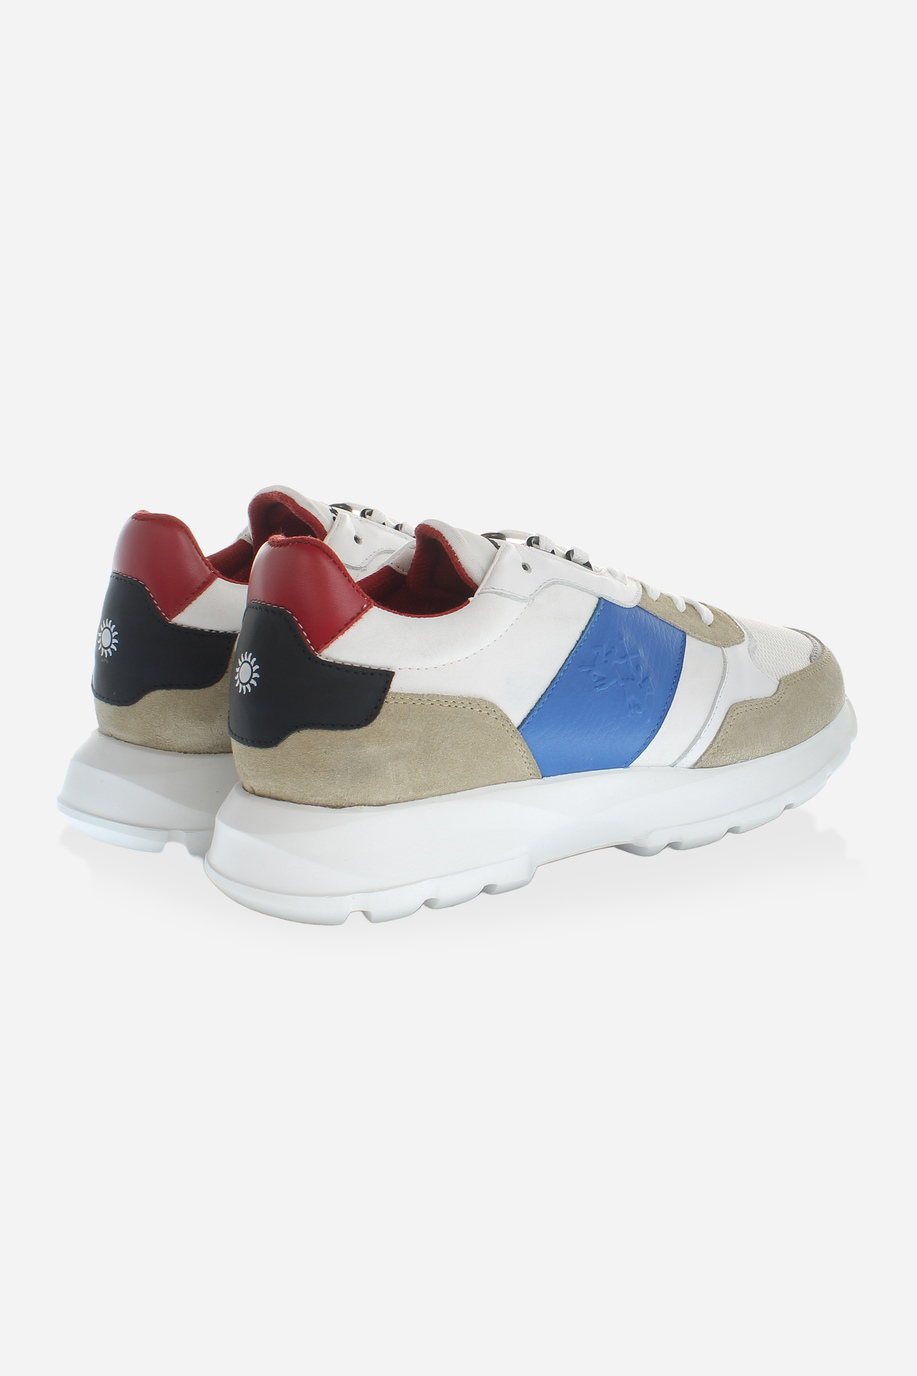 Trainers in mix of leather, fabric and suede - Shoes and Accessories | La Martina - Official Online Shop